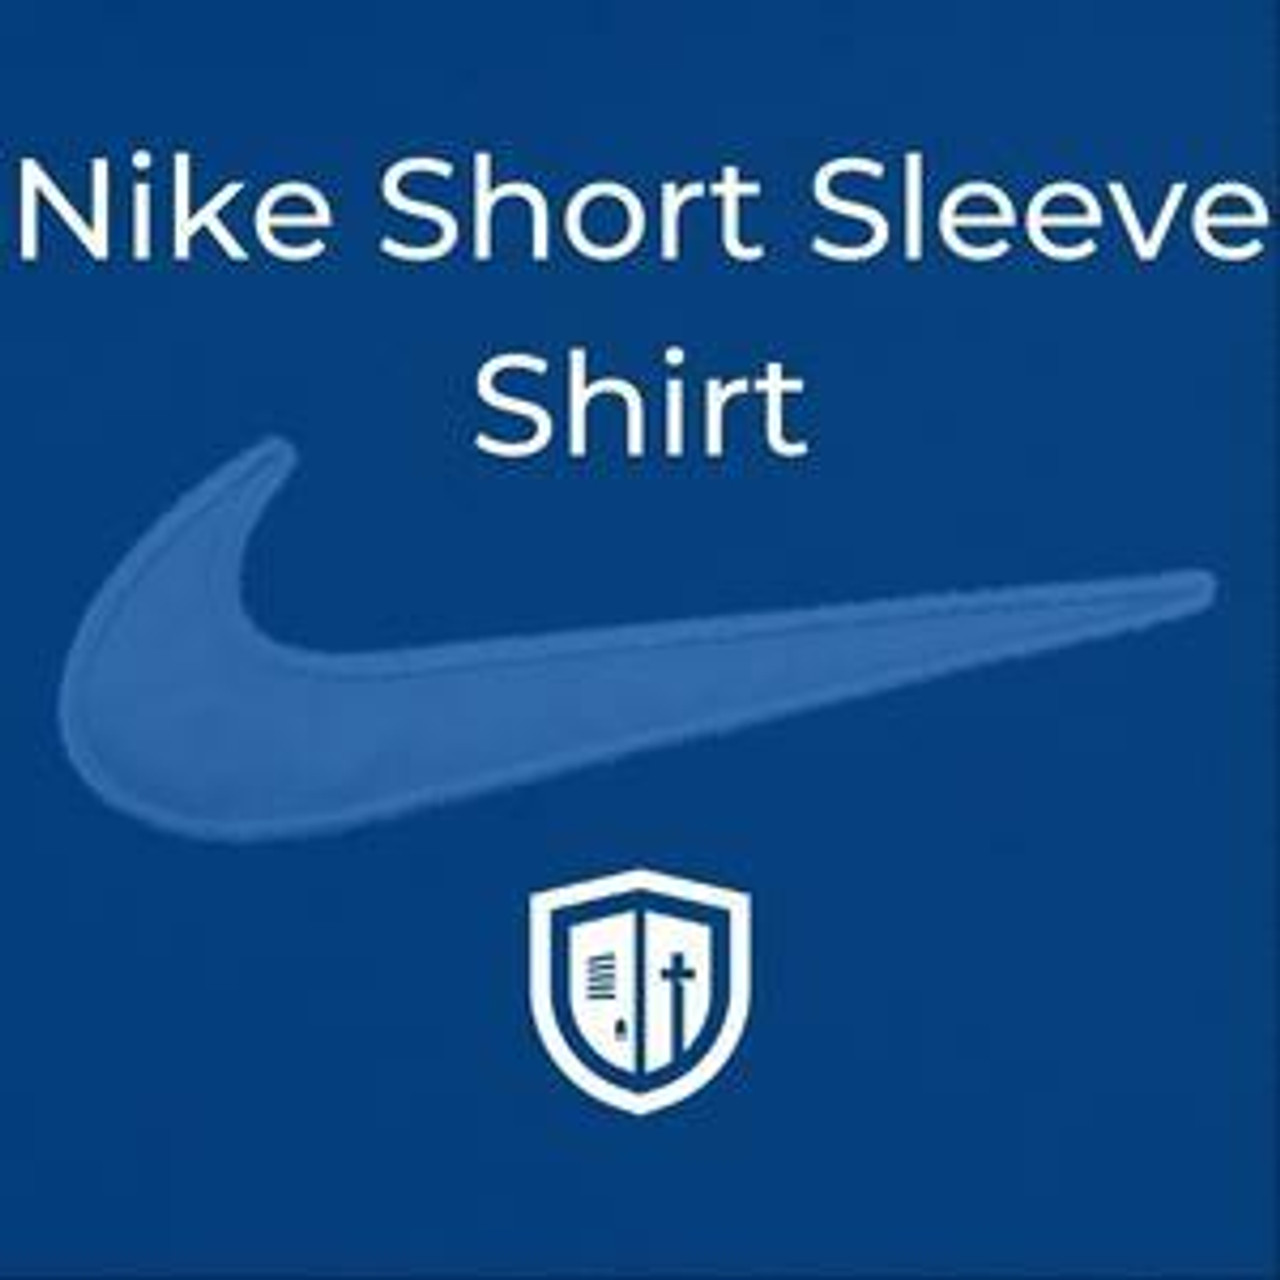 Shop Authentic Team-Issued Nike Short Sleeve Shirts from Locker Room Direct